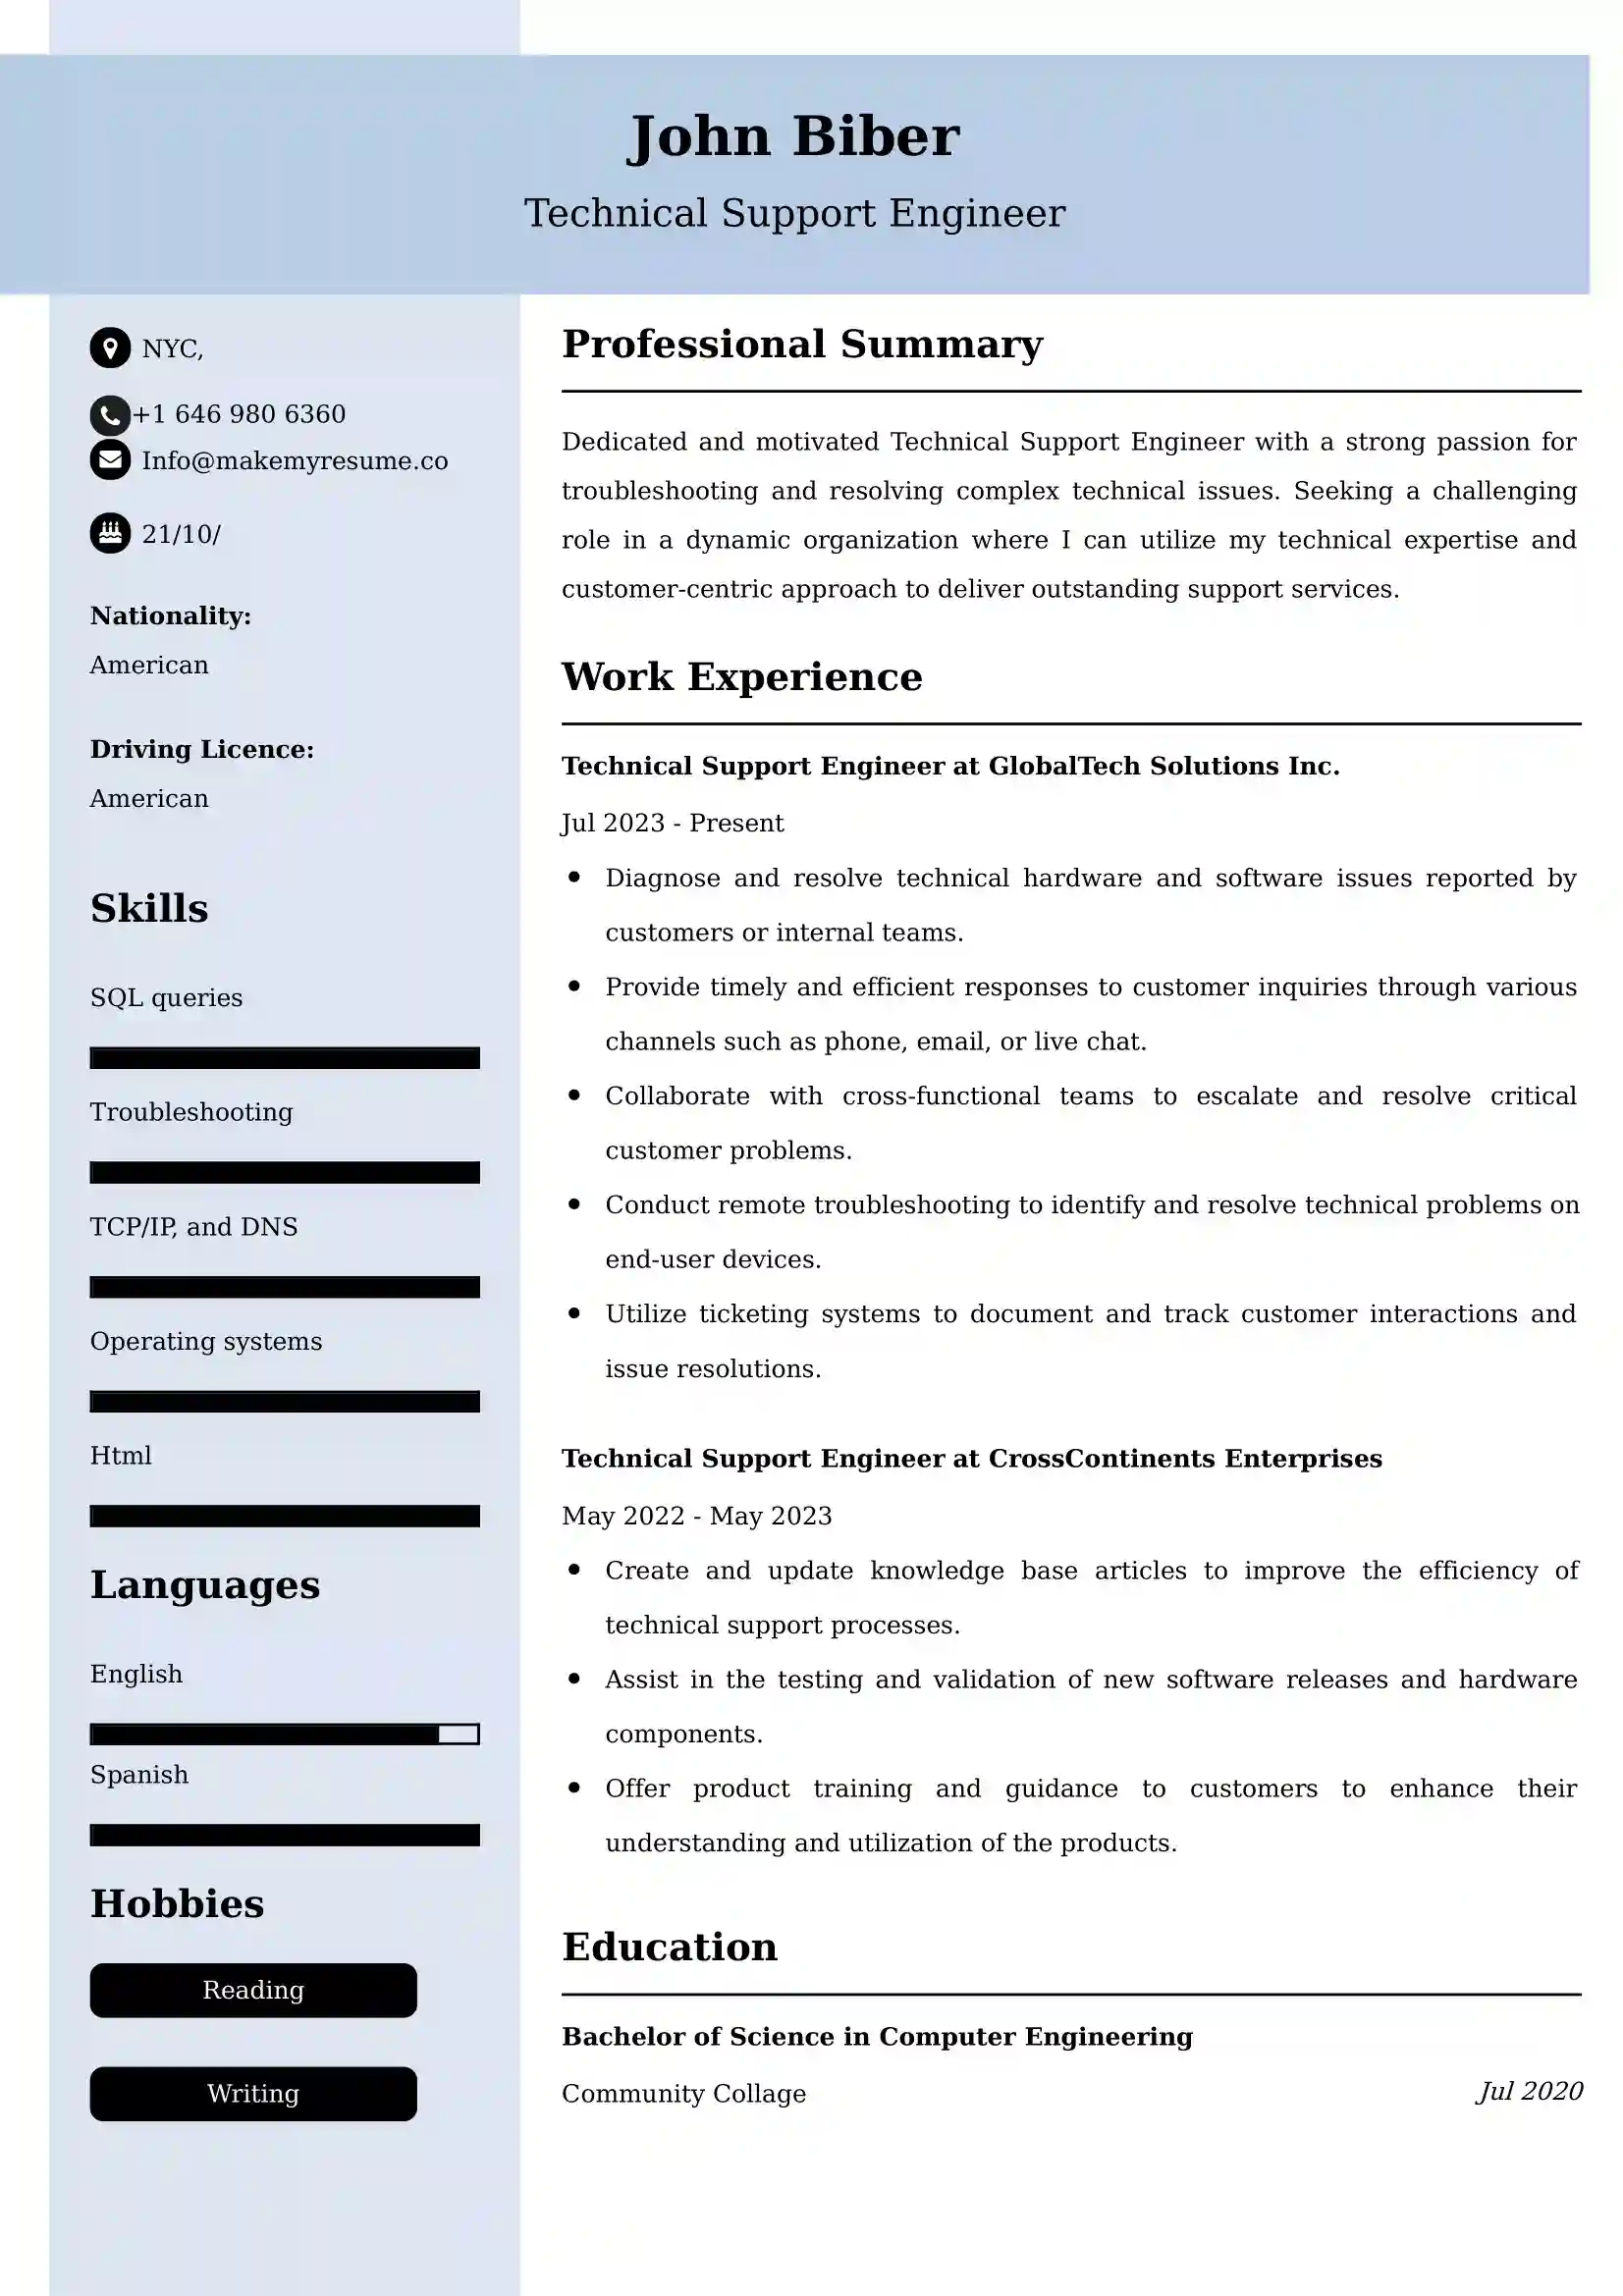 Technical Support Engineer Resume Examples - Brazilian Format, Latest Template